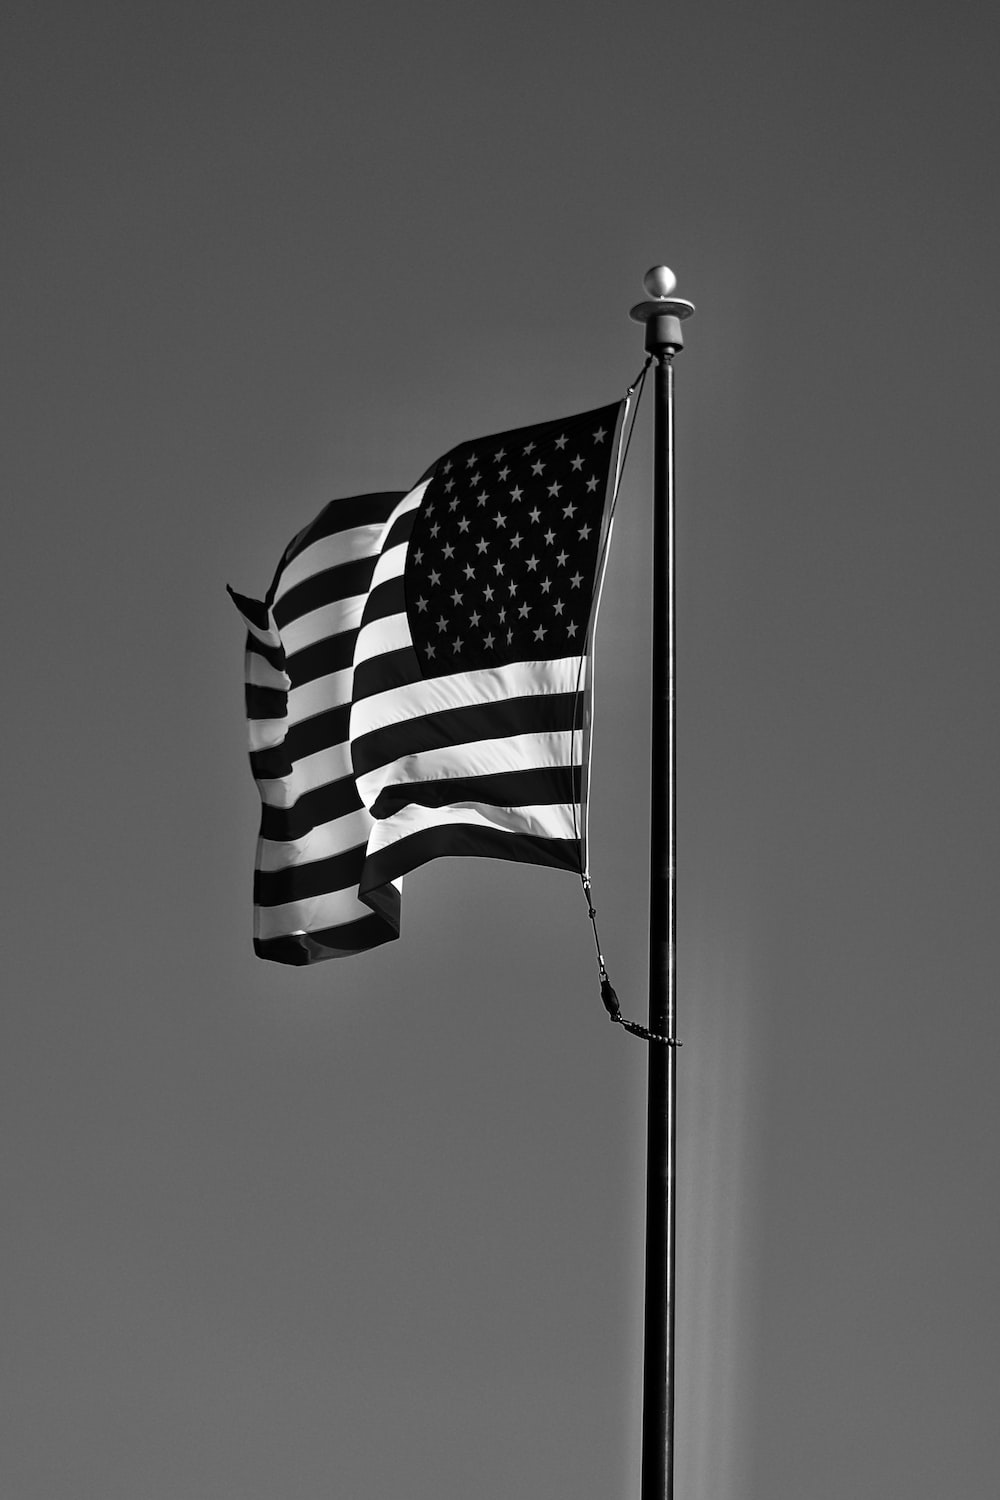 Black Flag Picture. Download Free Image